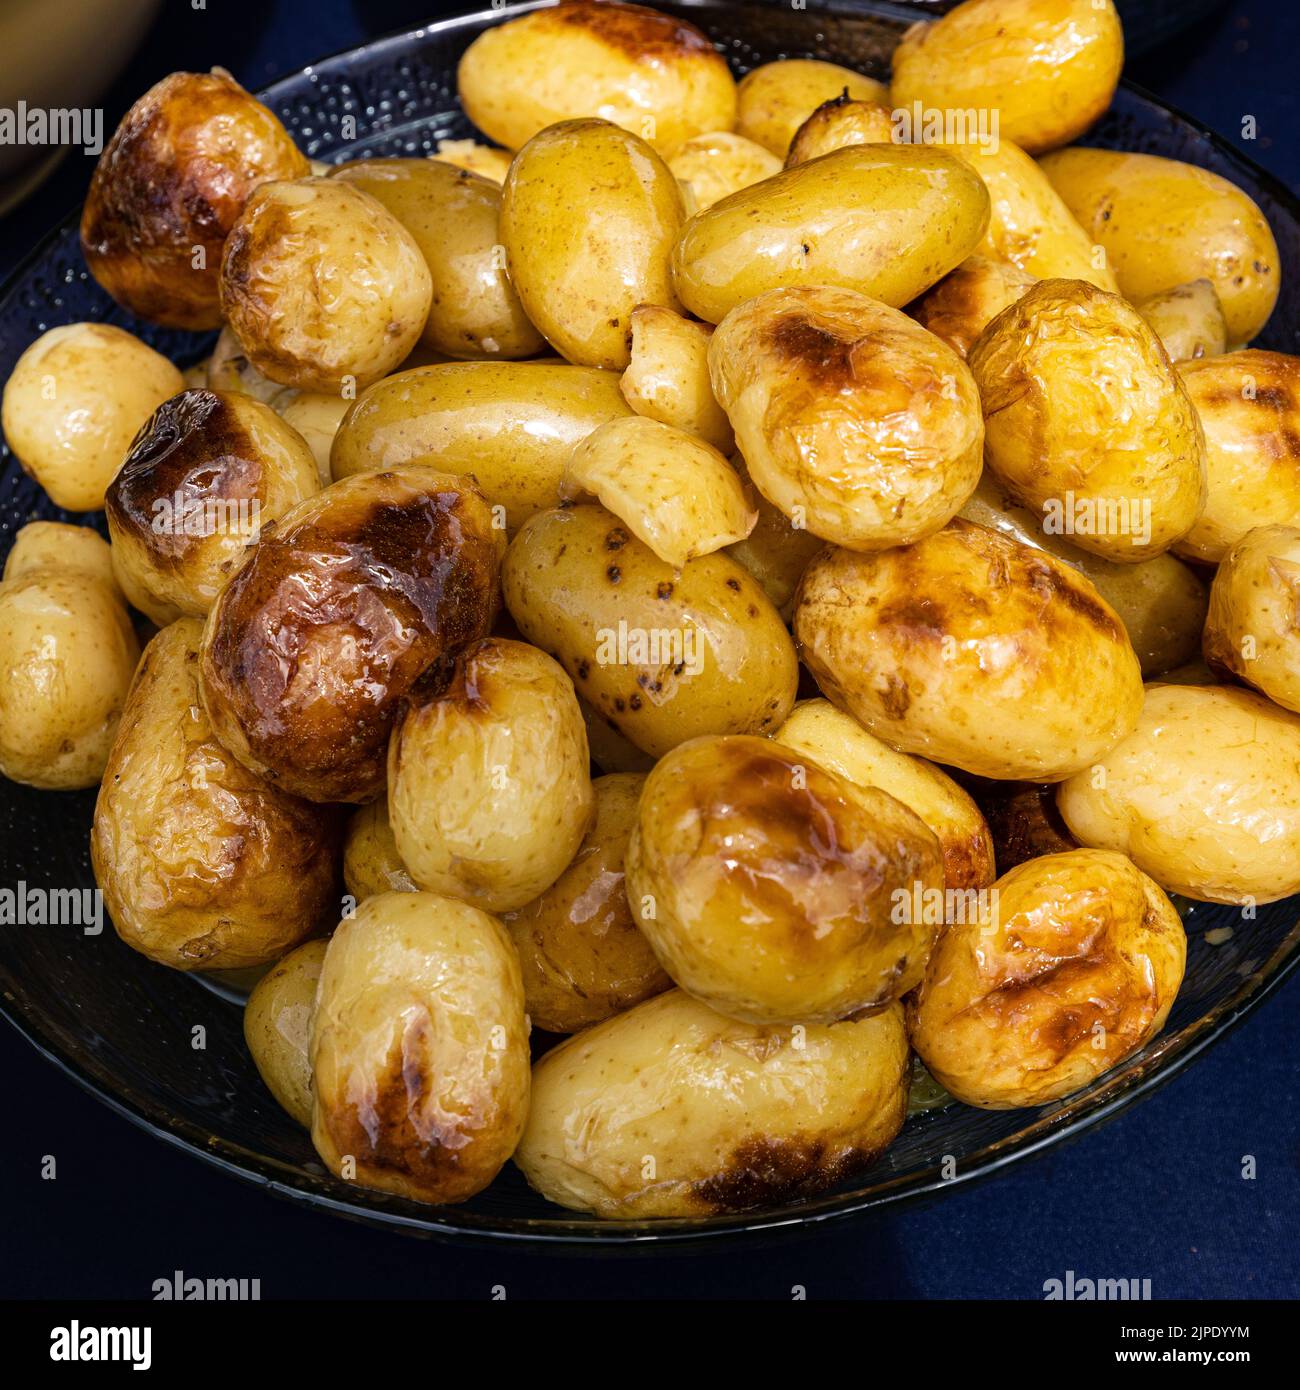 A tray of roasted new potatoes at a barbecue Stock Photo